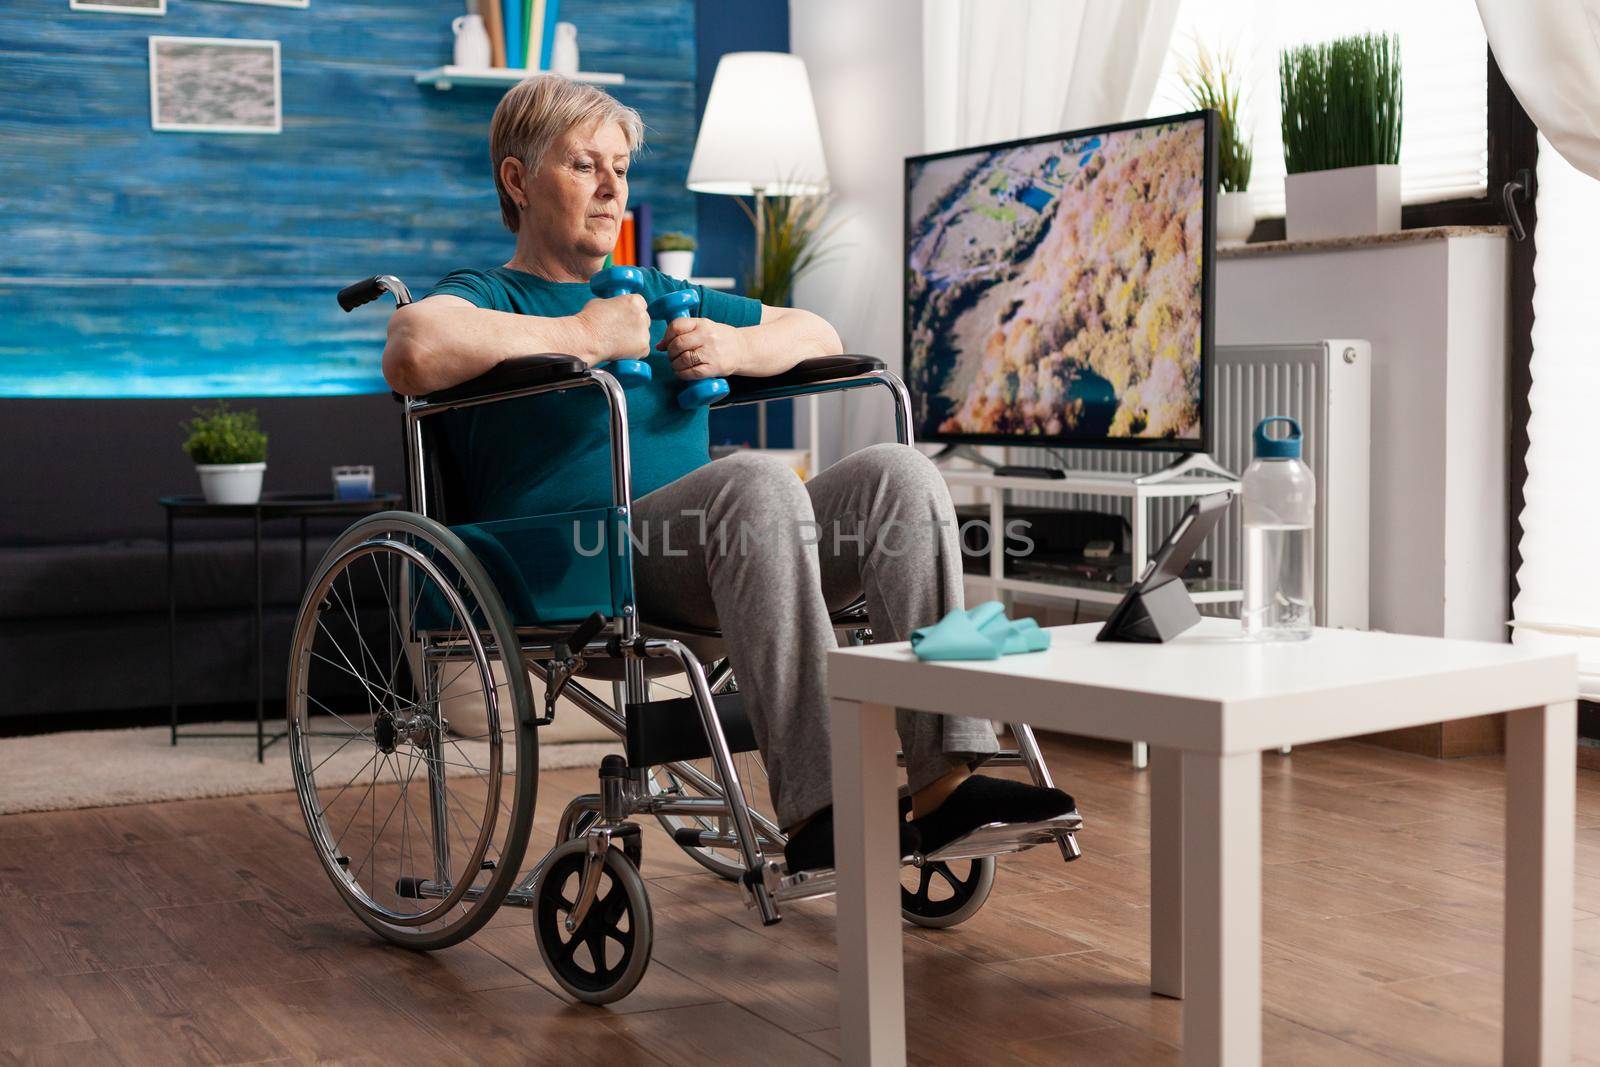 Invalid senior woman in wheelchair training body muscles using gymnastic dumbbells by DCStudio